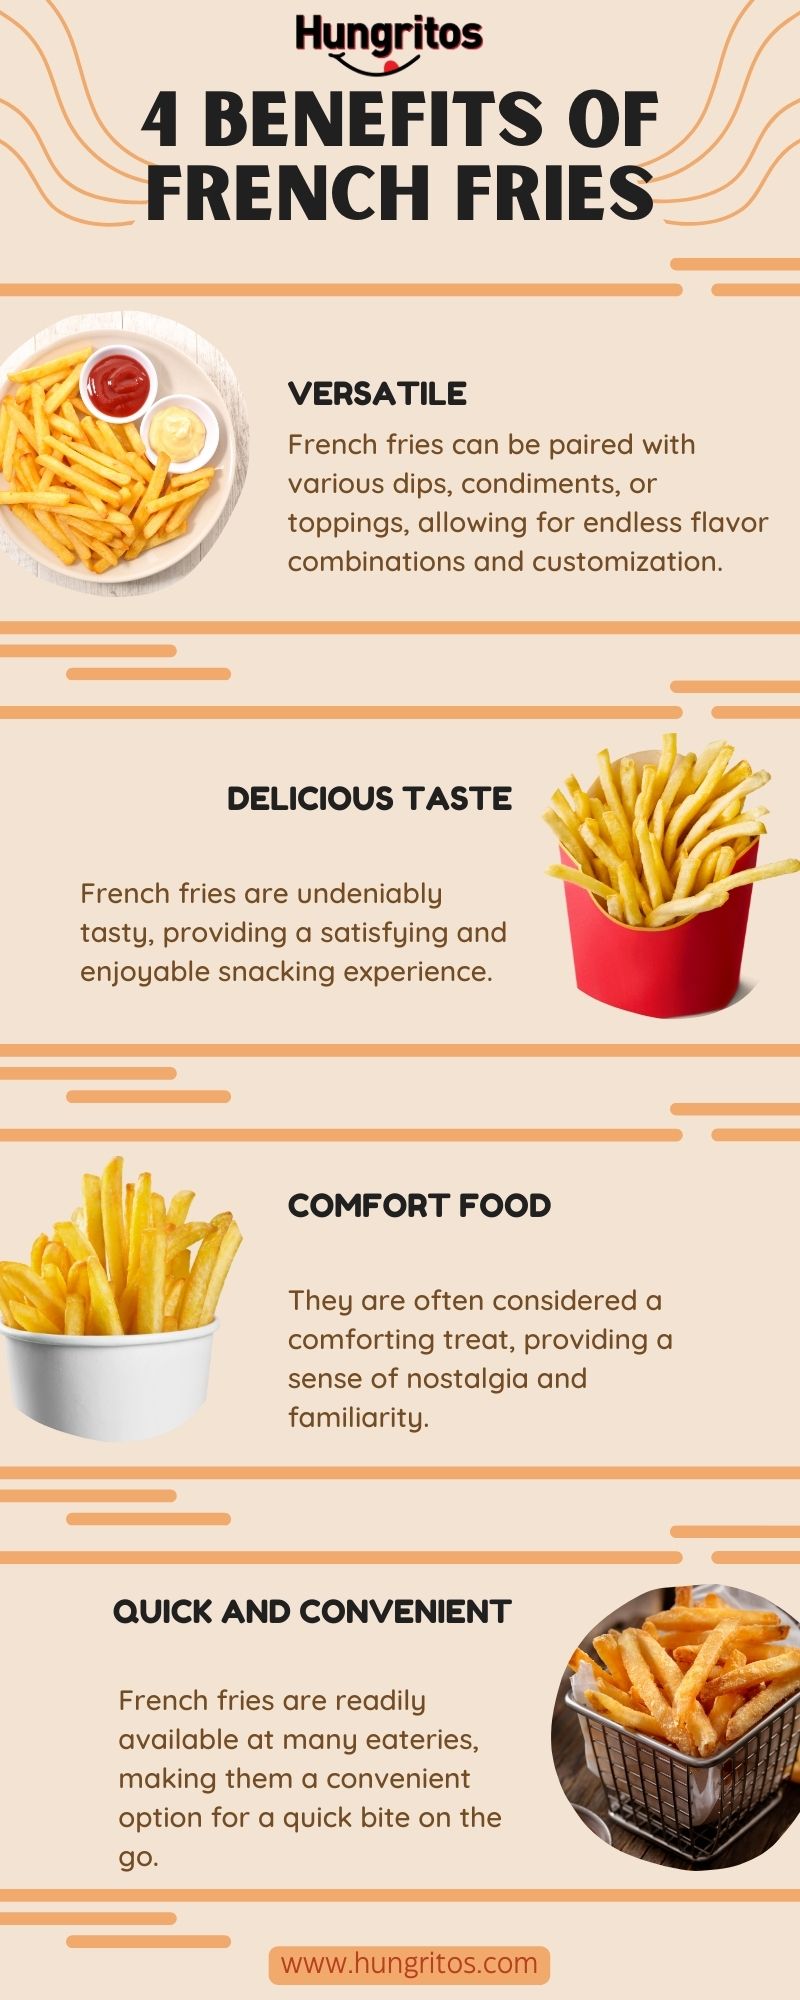 are french fries vegetables